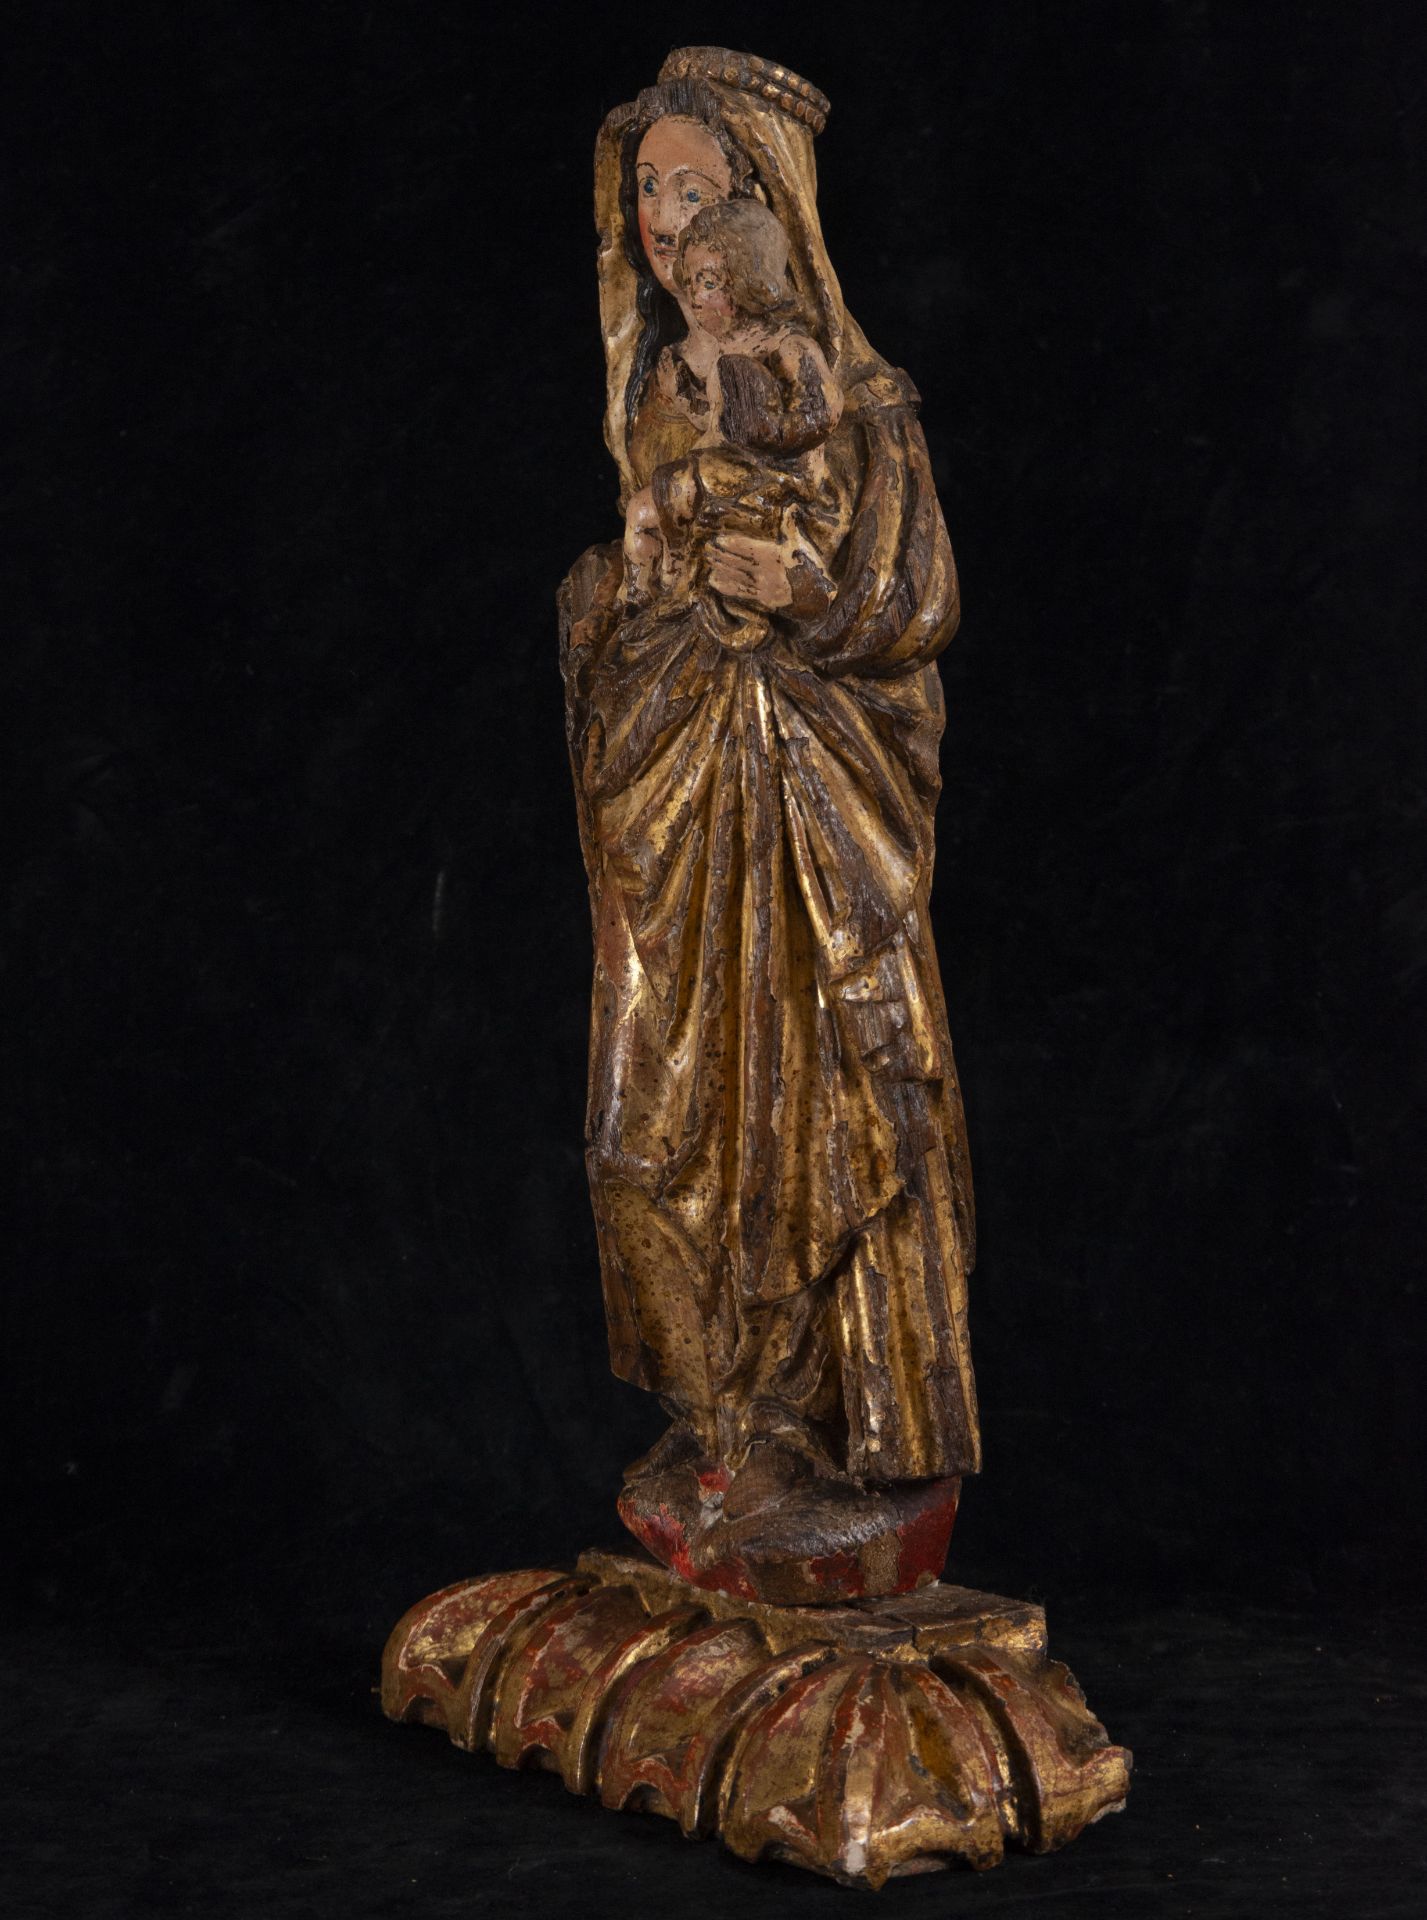 Virgen del Sombrero with Child God in Arms, Hispano Flemish school of the 16th century, Burgos or Pa - Image 2 of 4